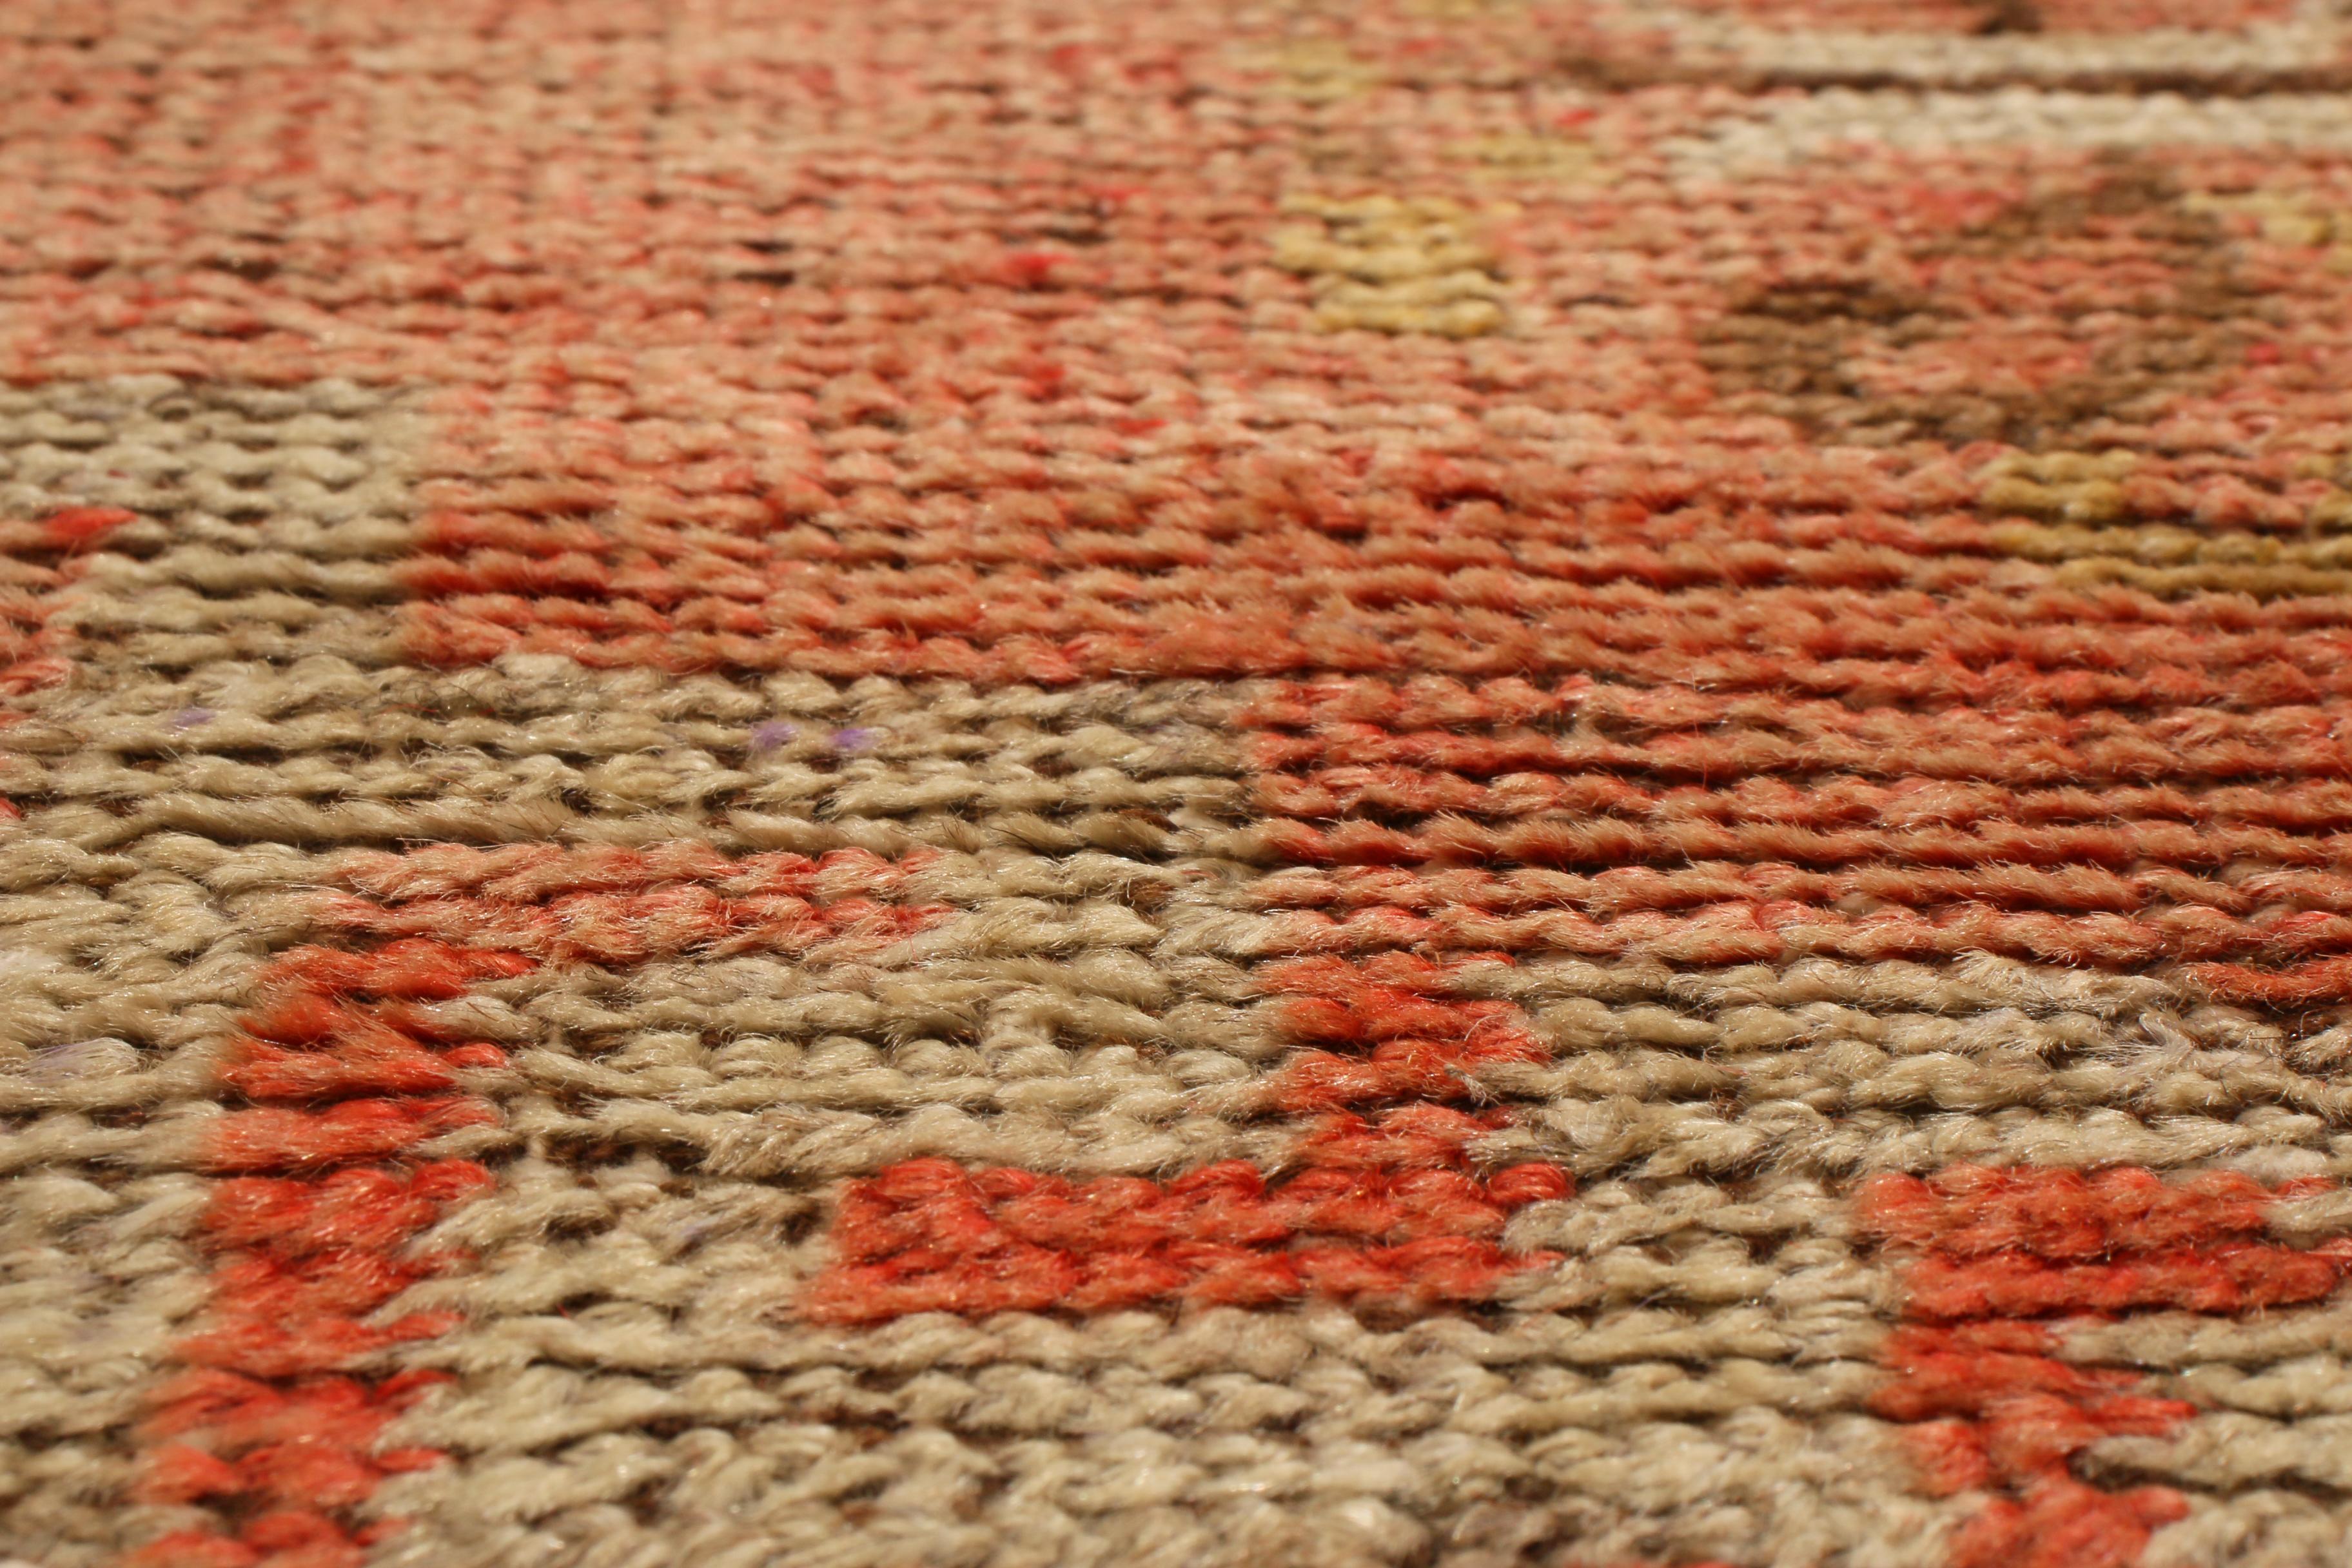 Hand-Knotted Antique Khotan Transitional Red and Golden Beige Wool Rug